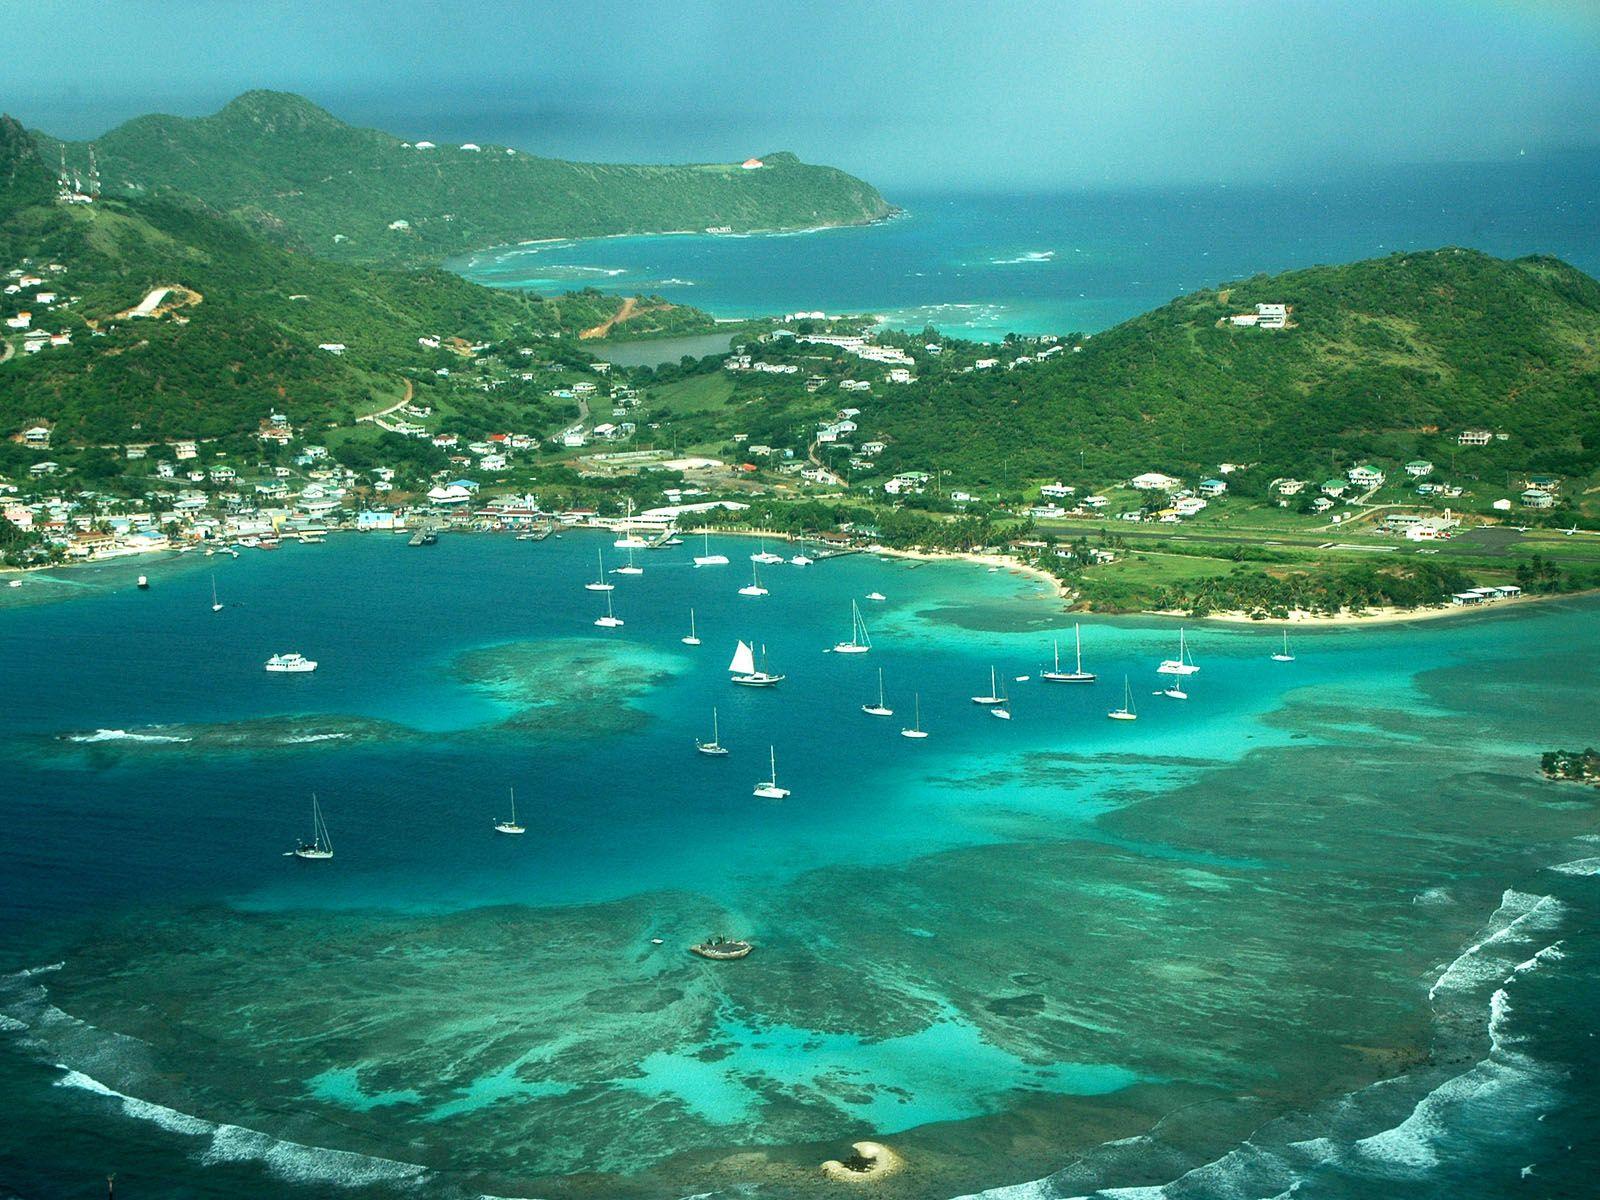 StVincent and the Grenadines – My Carib Spot